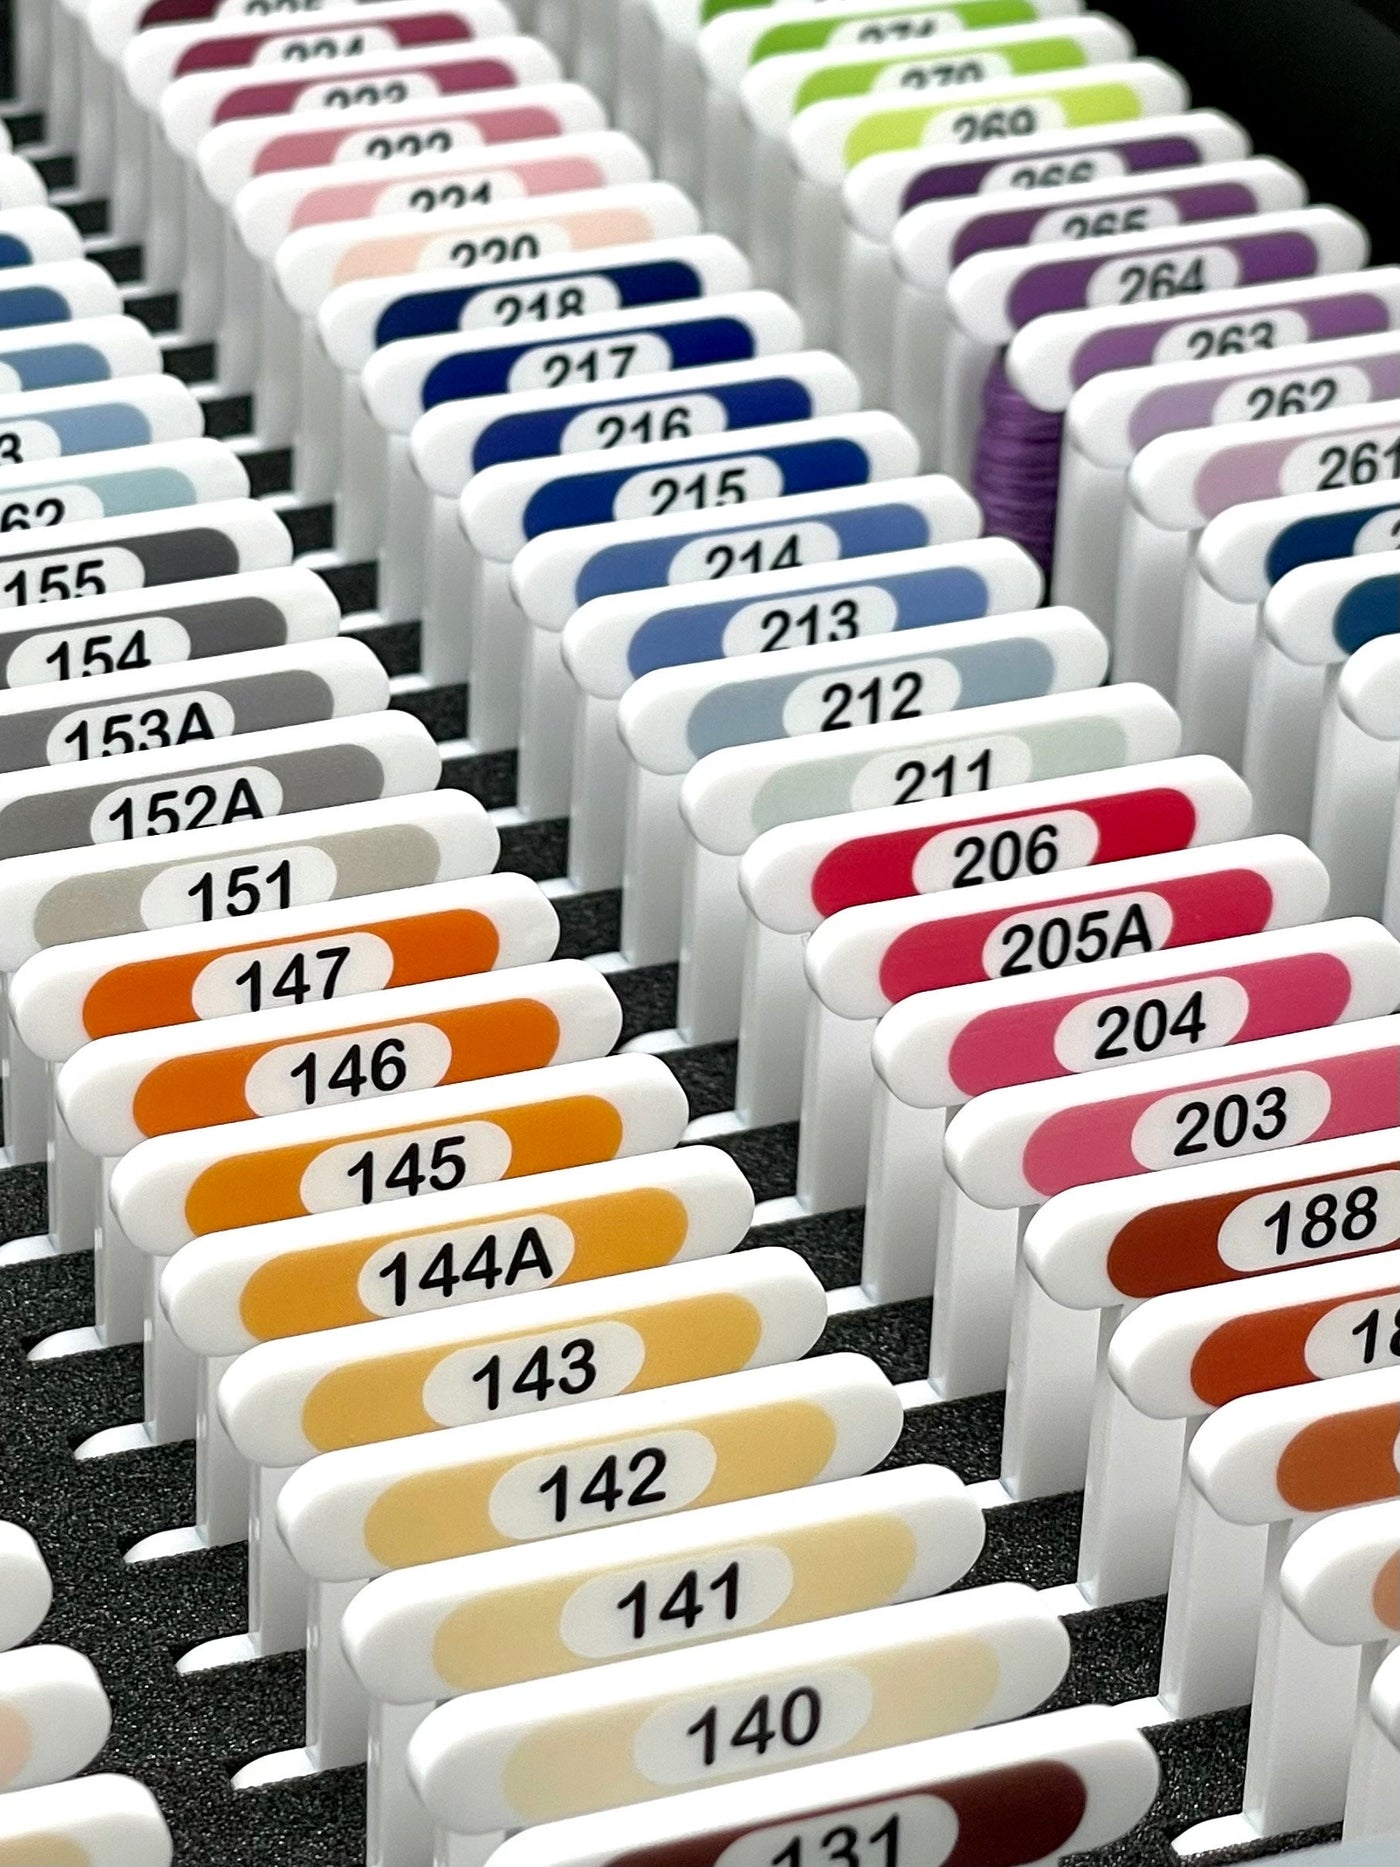 COSMO solid colours (x500) 3mm acrylic bobbins with printed number and colour swatch